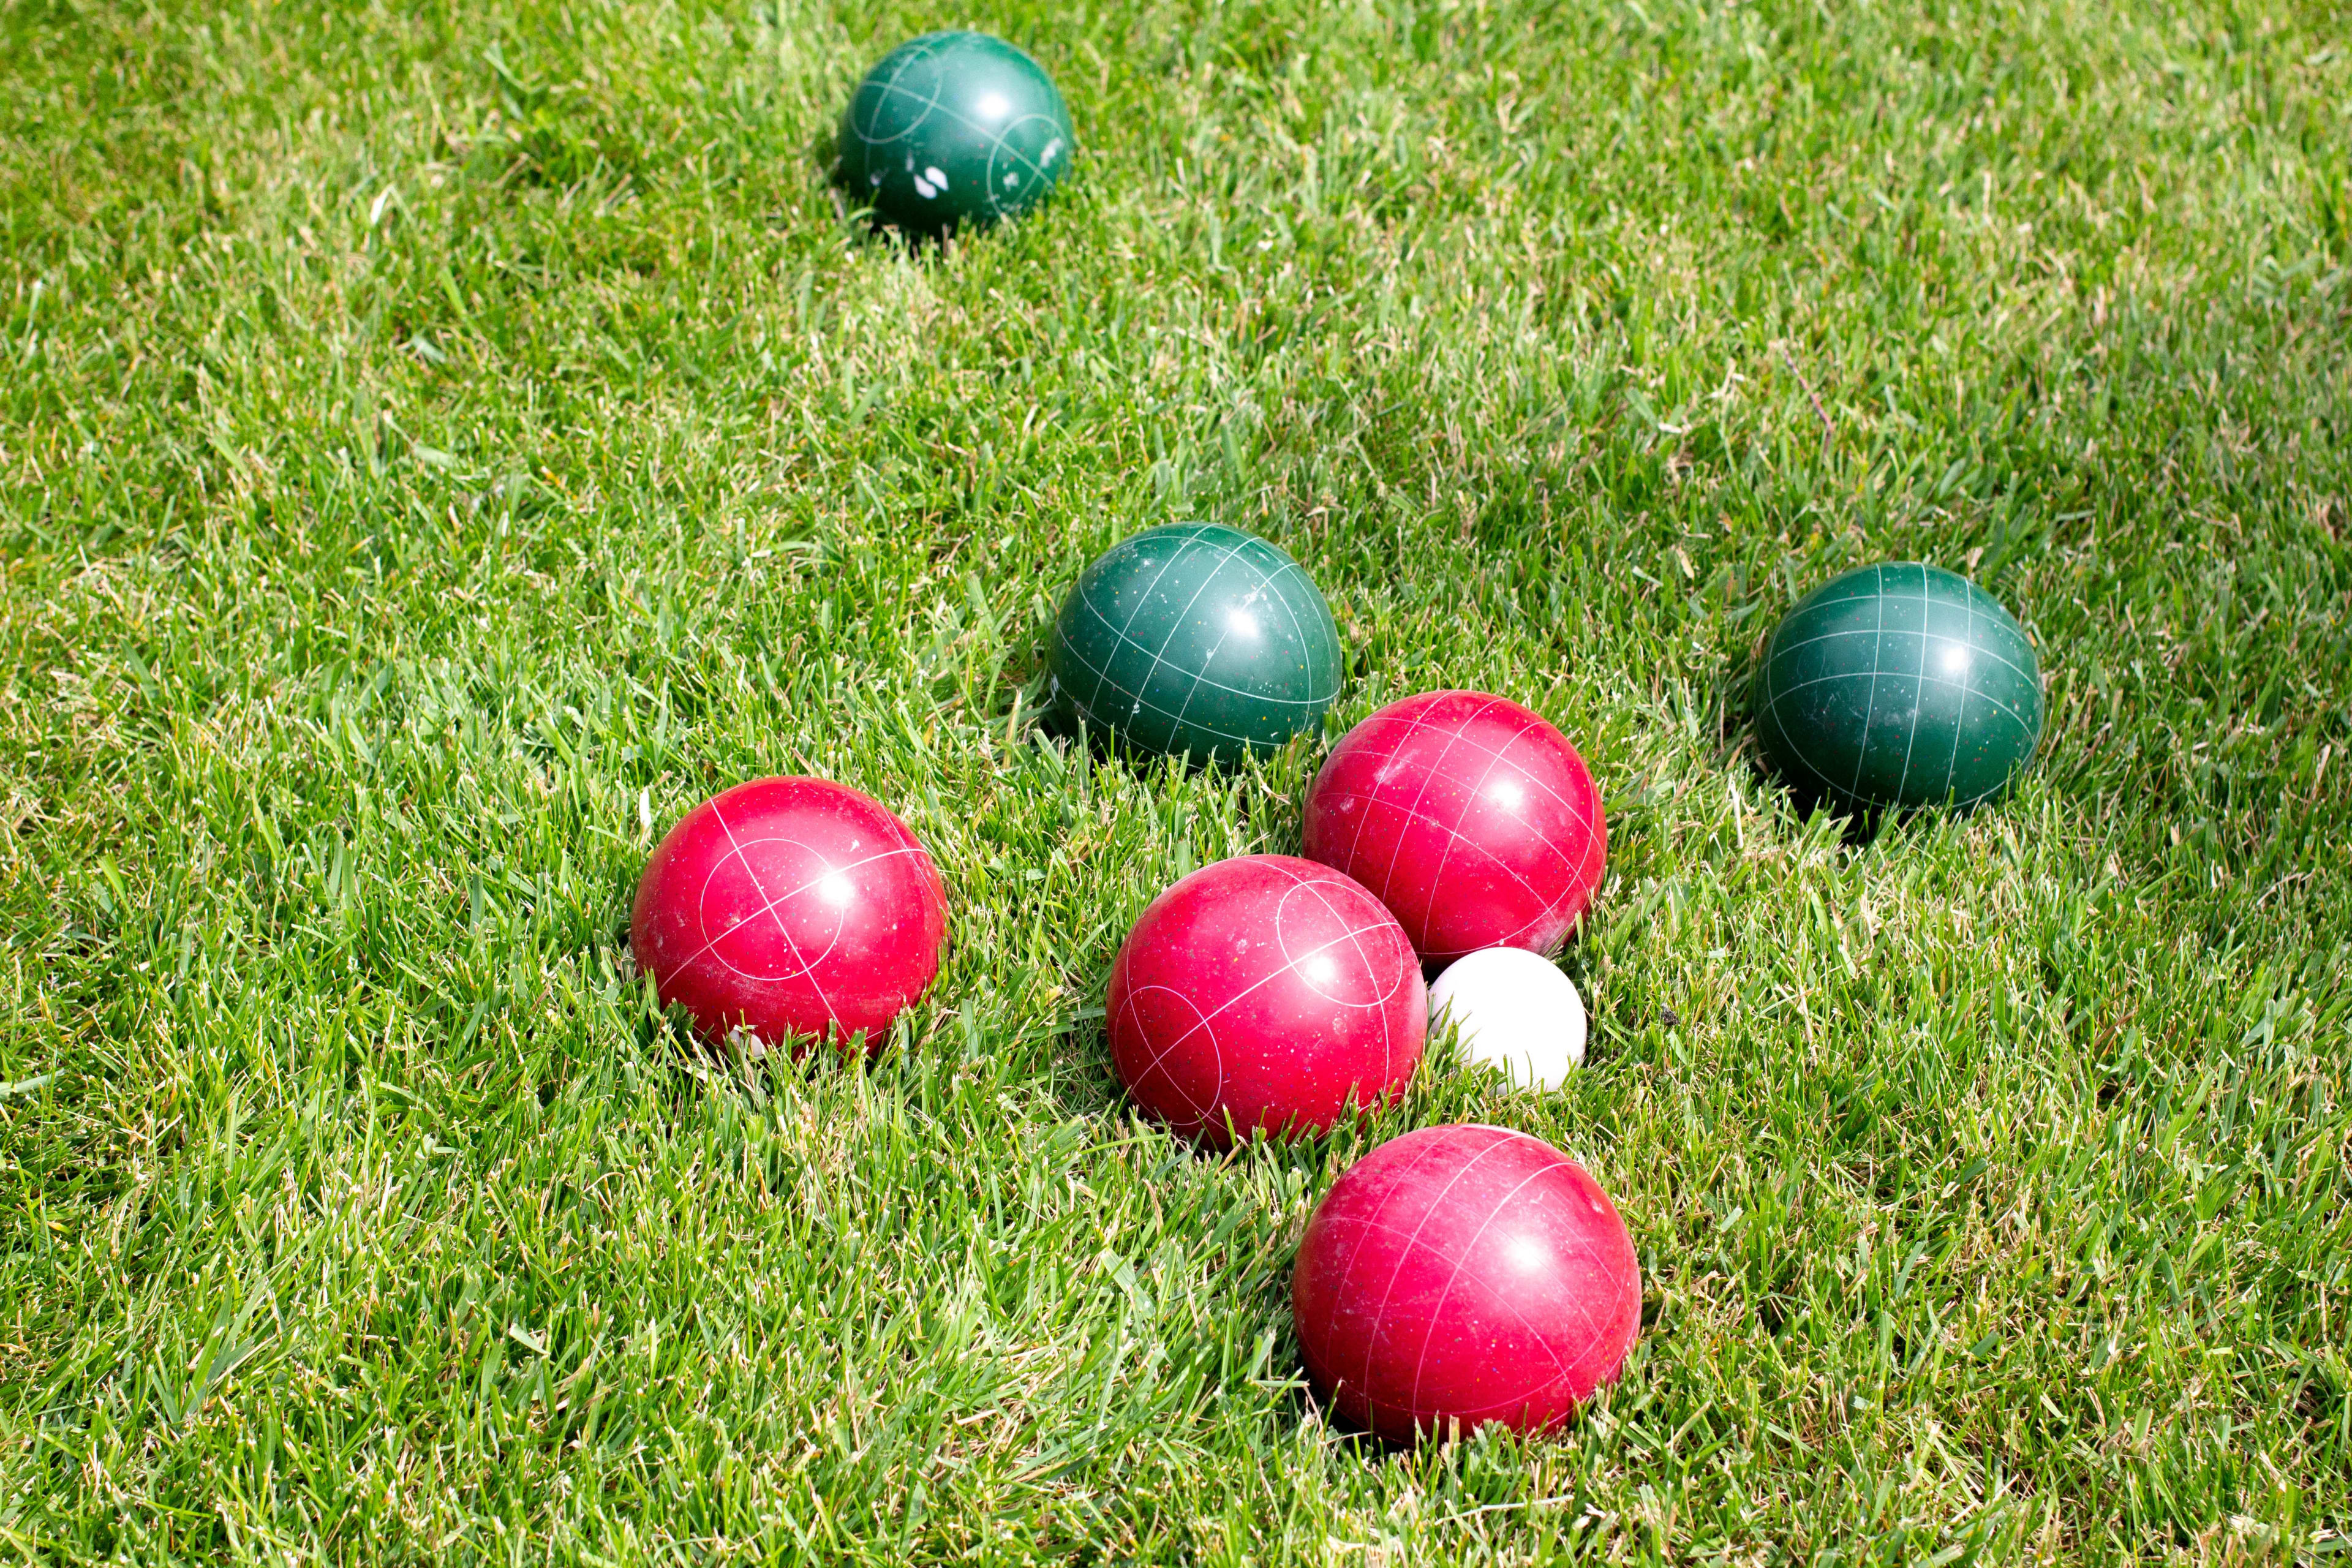 Red and green bocce balls on grass